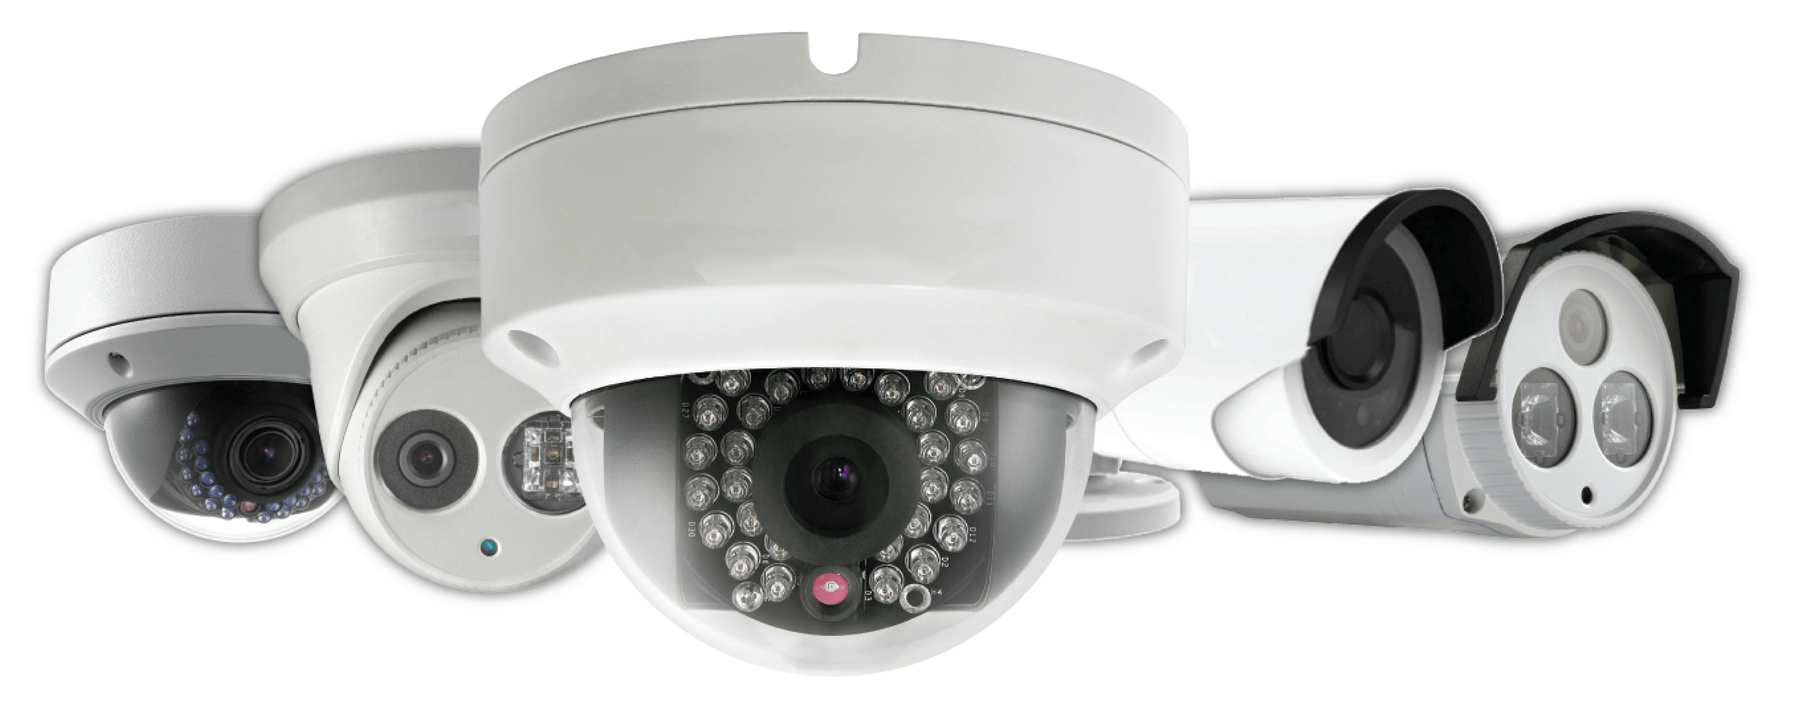 Choosing the Right Security Camera System